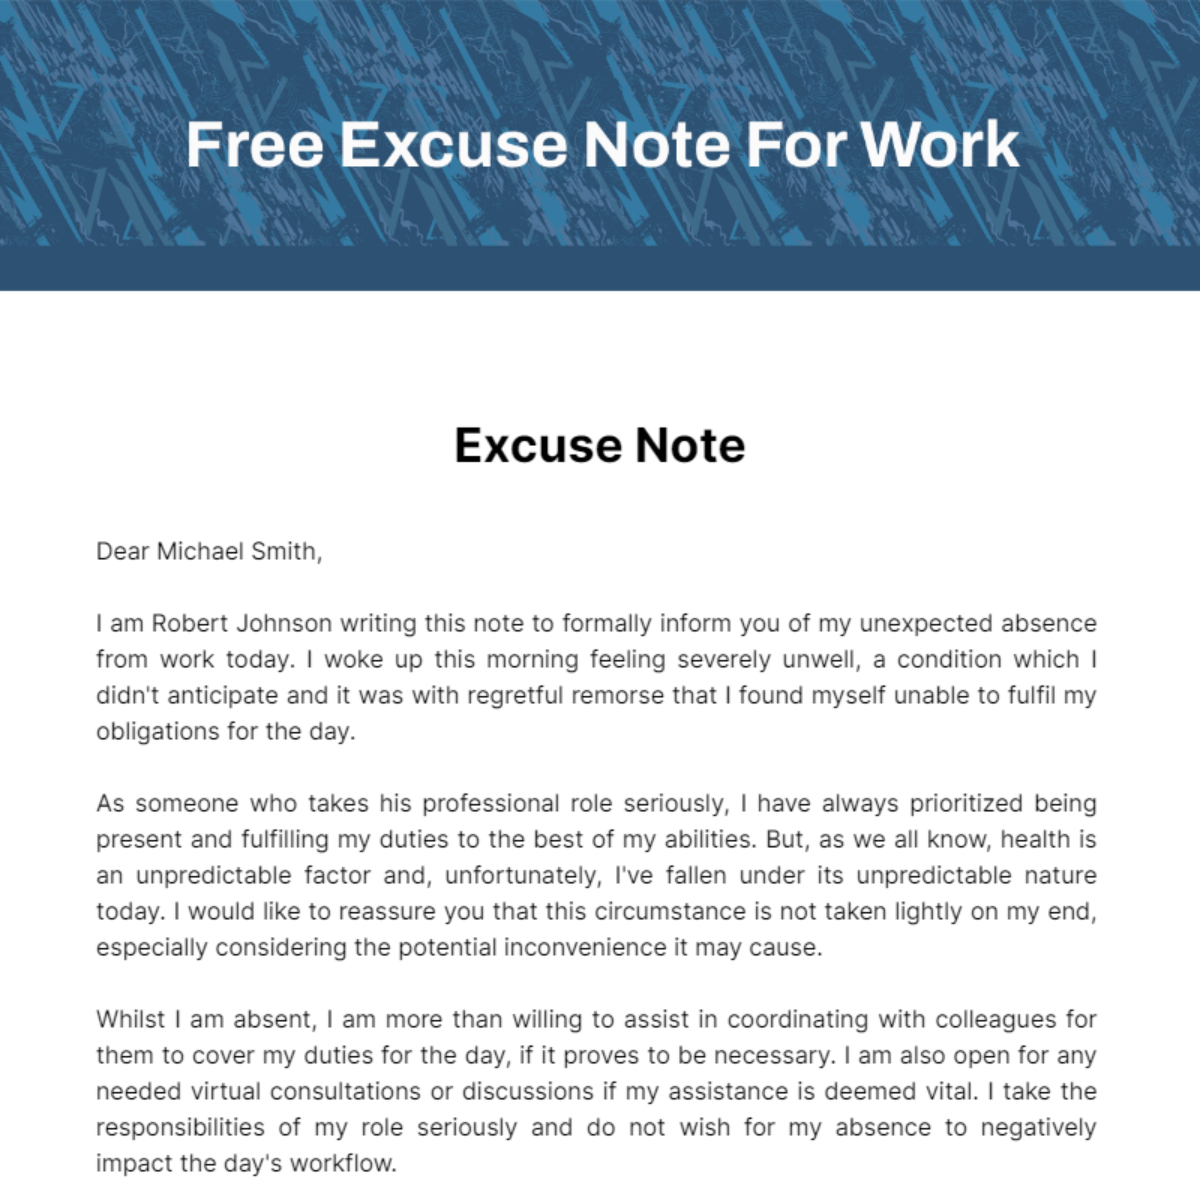 Excuse Note For Work Template